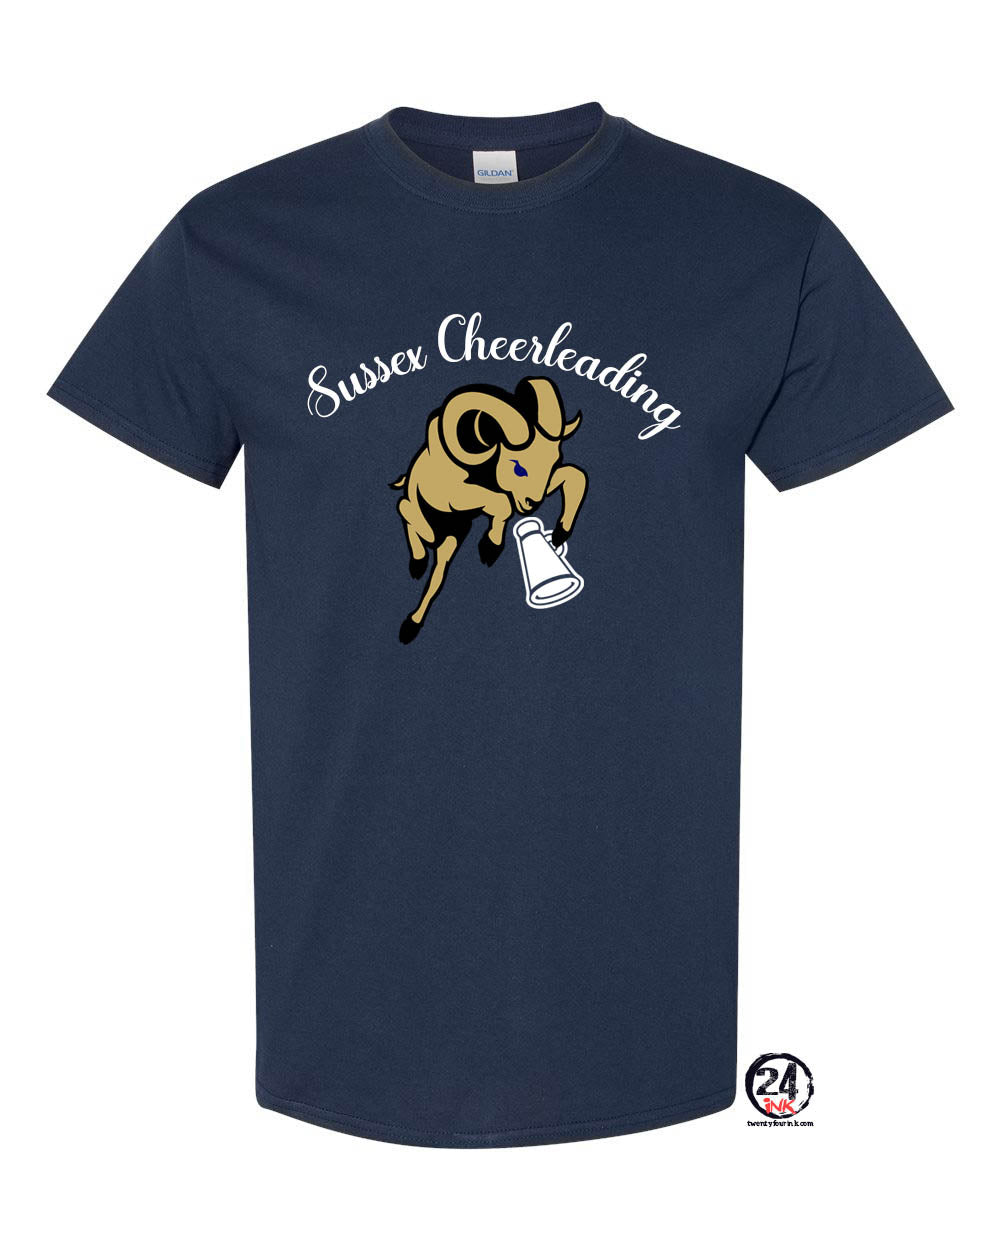 Sussex middle School Cheer design 3 T-Shirt